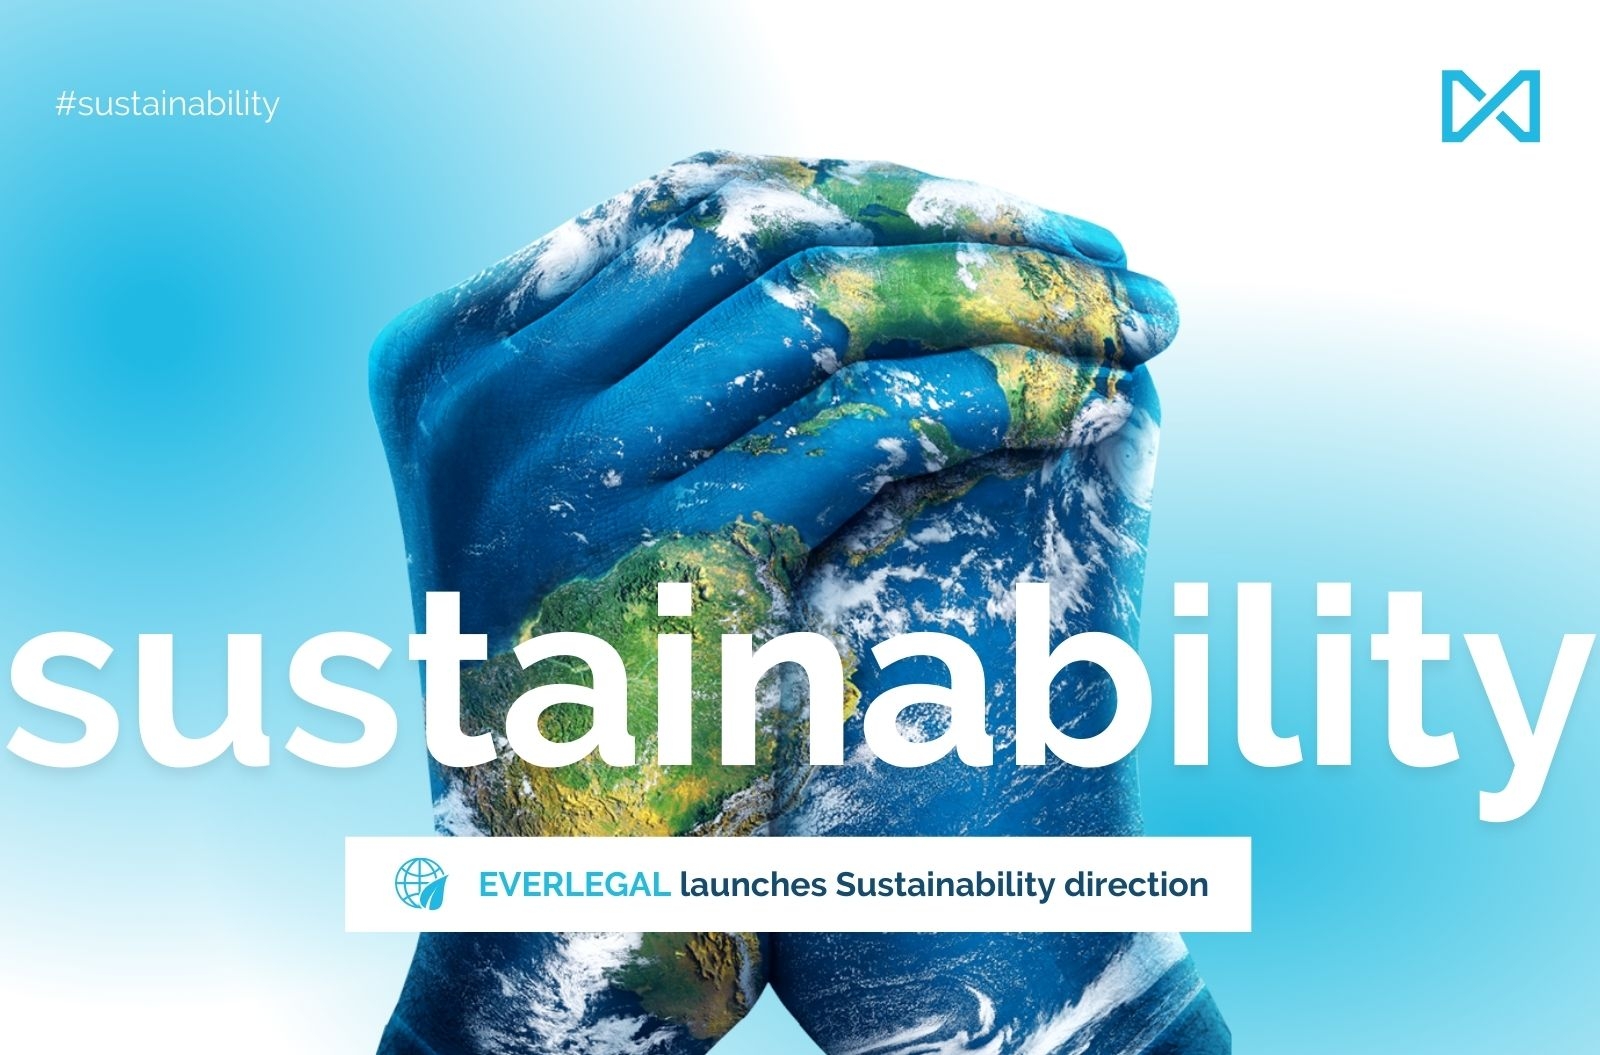 EVERLEGAL launches Sustainability direction